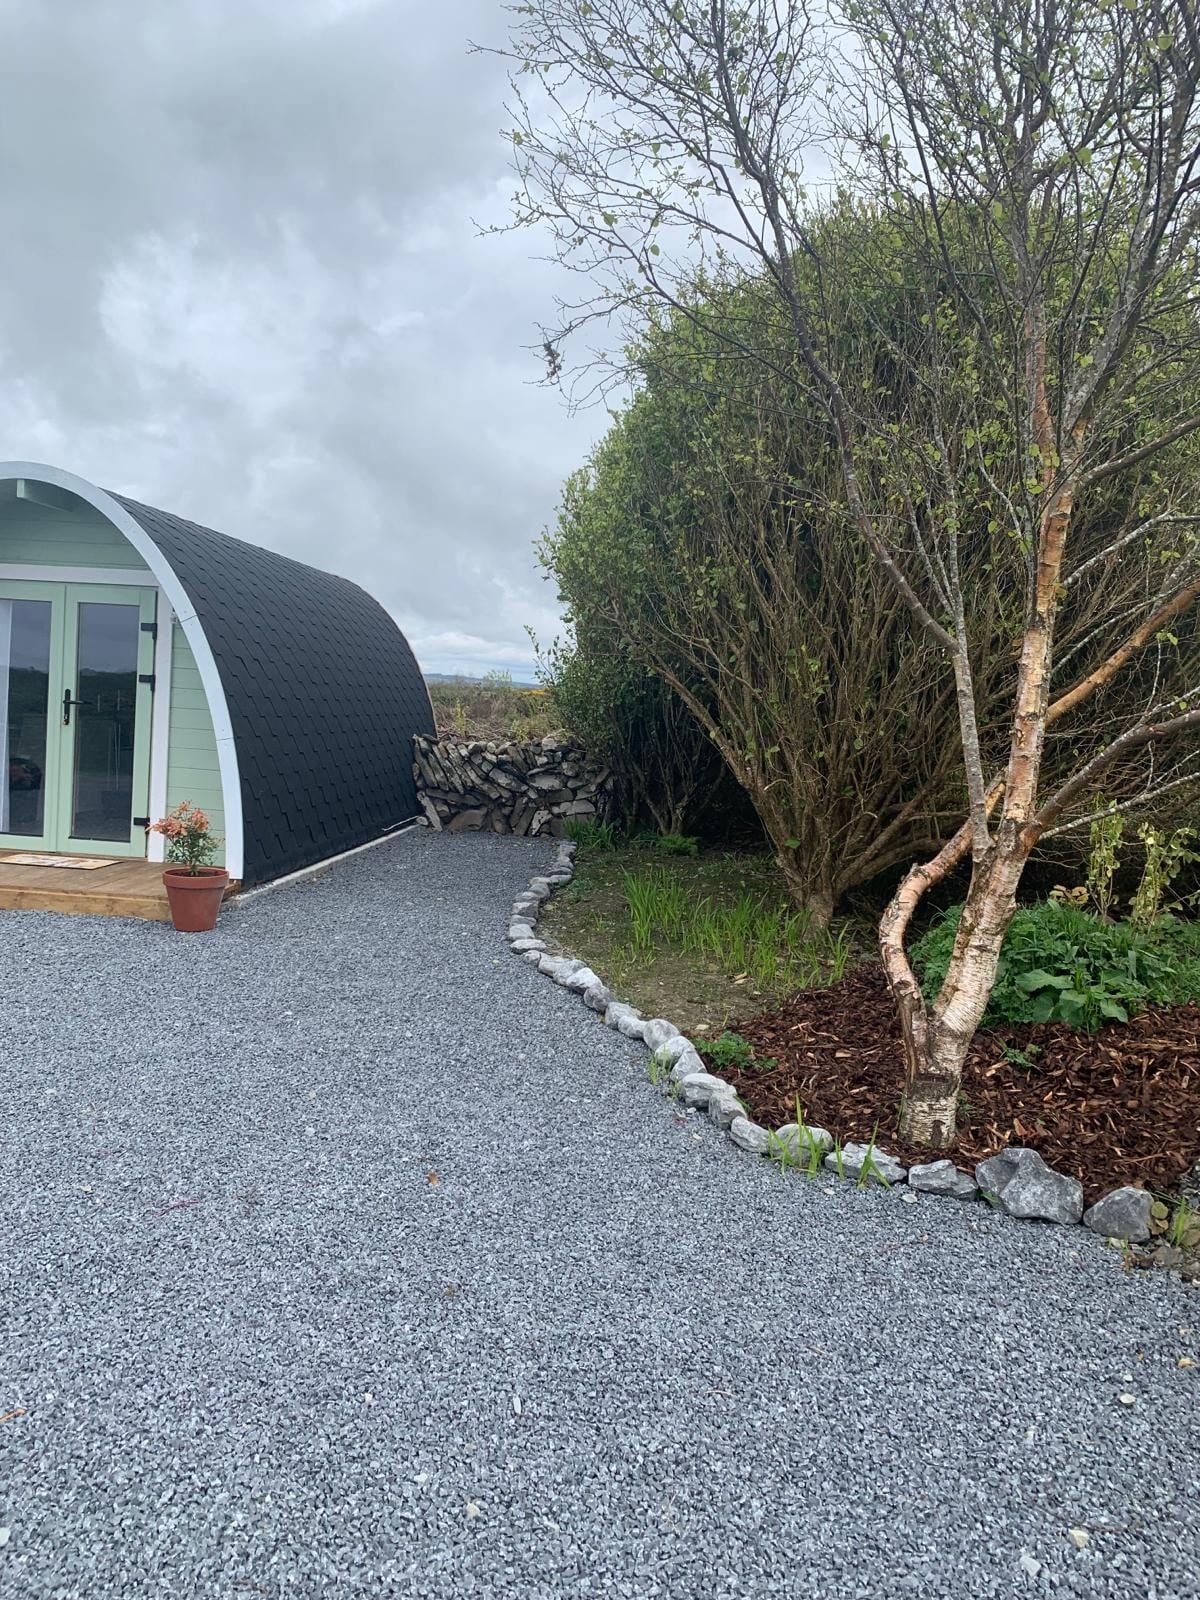 Cliffs of Moher glamping pod